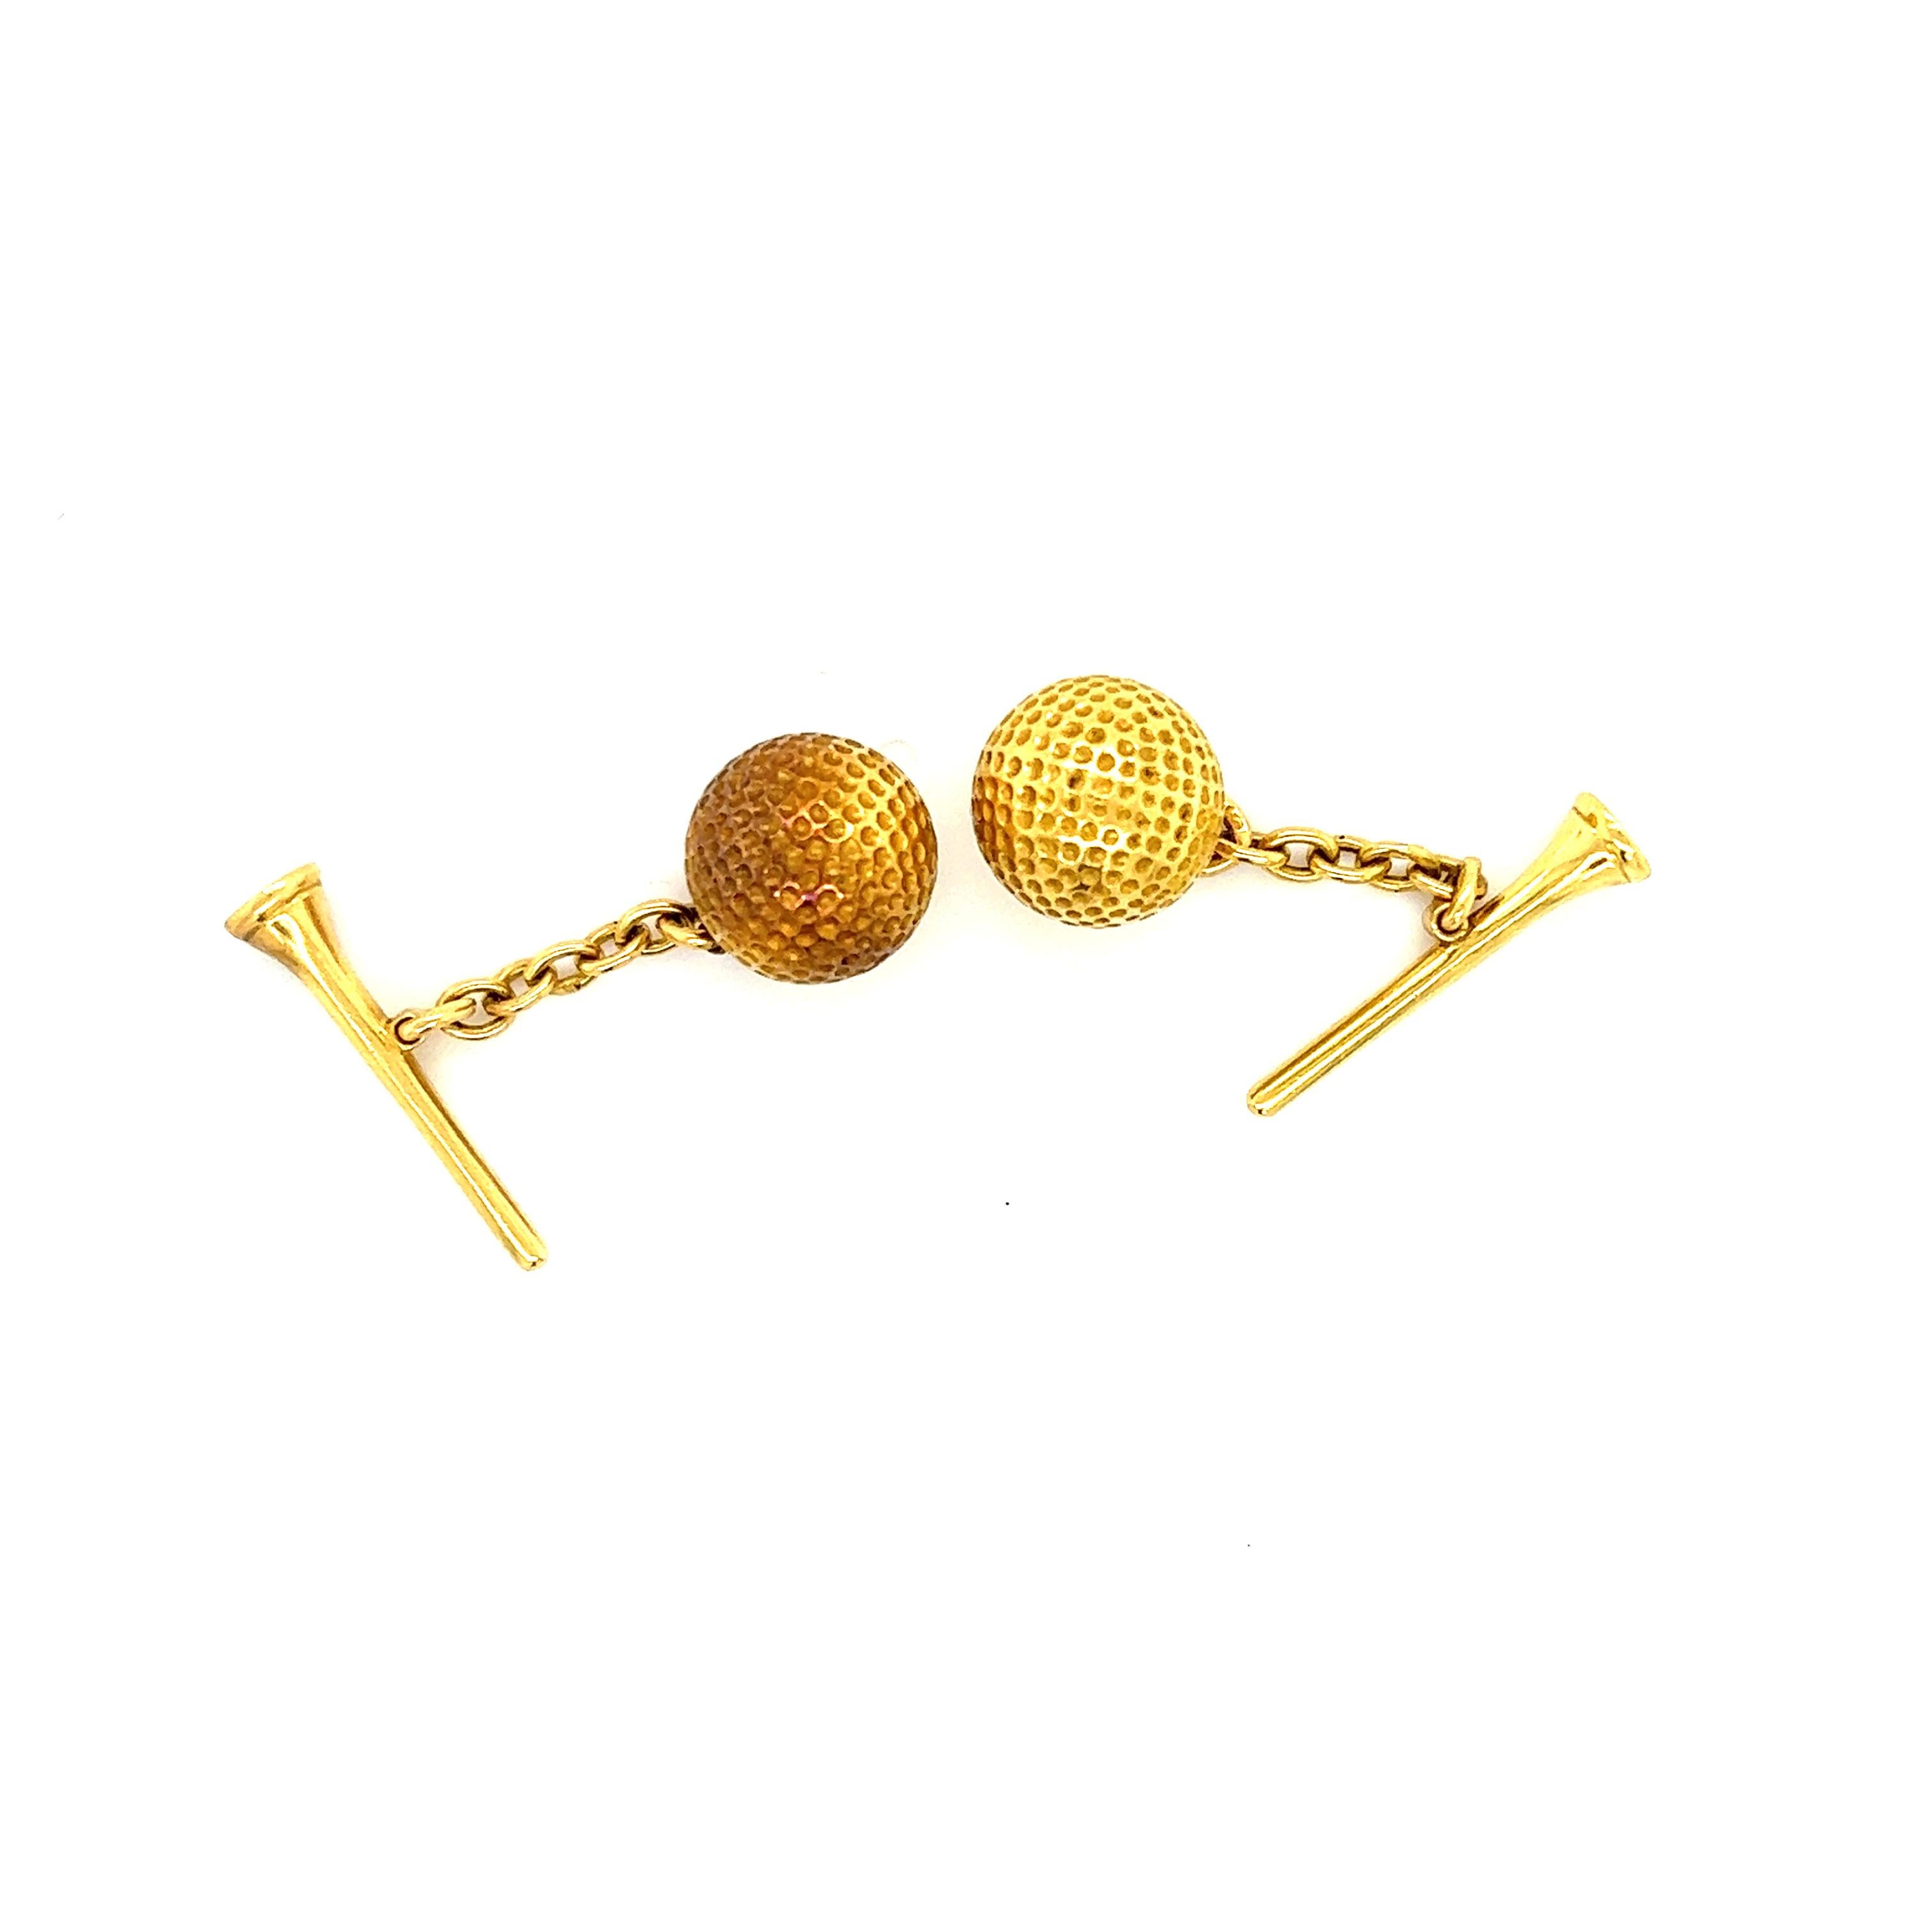 Fantastic display of craftsmanship shown on these hand crafted 18k yellow gold French retro cufflinks. The pair shows a golf theme as a finely detailed golf ball is linked to a tee. The pair are in excellent pre owned condition, they seem to rarely